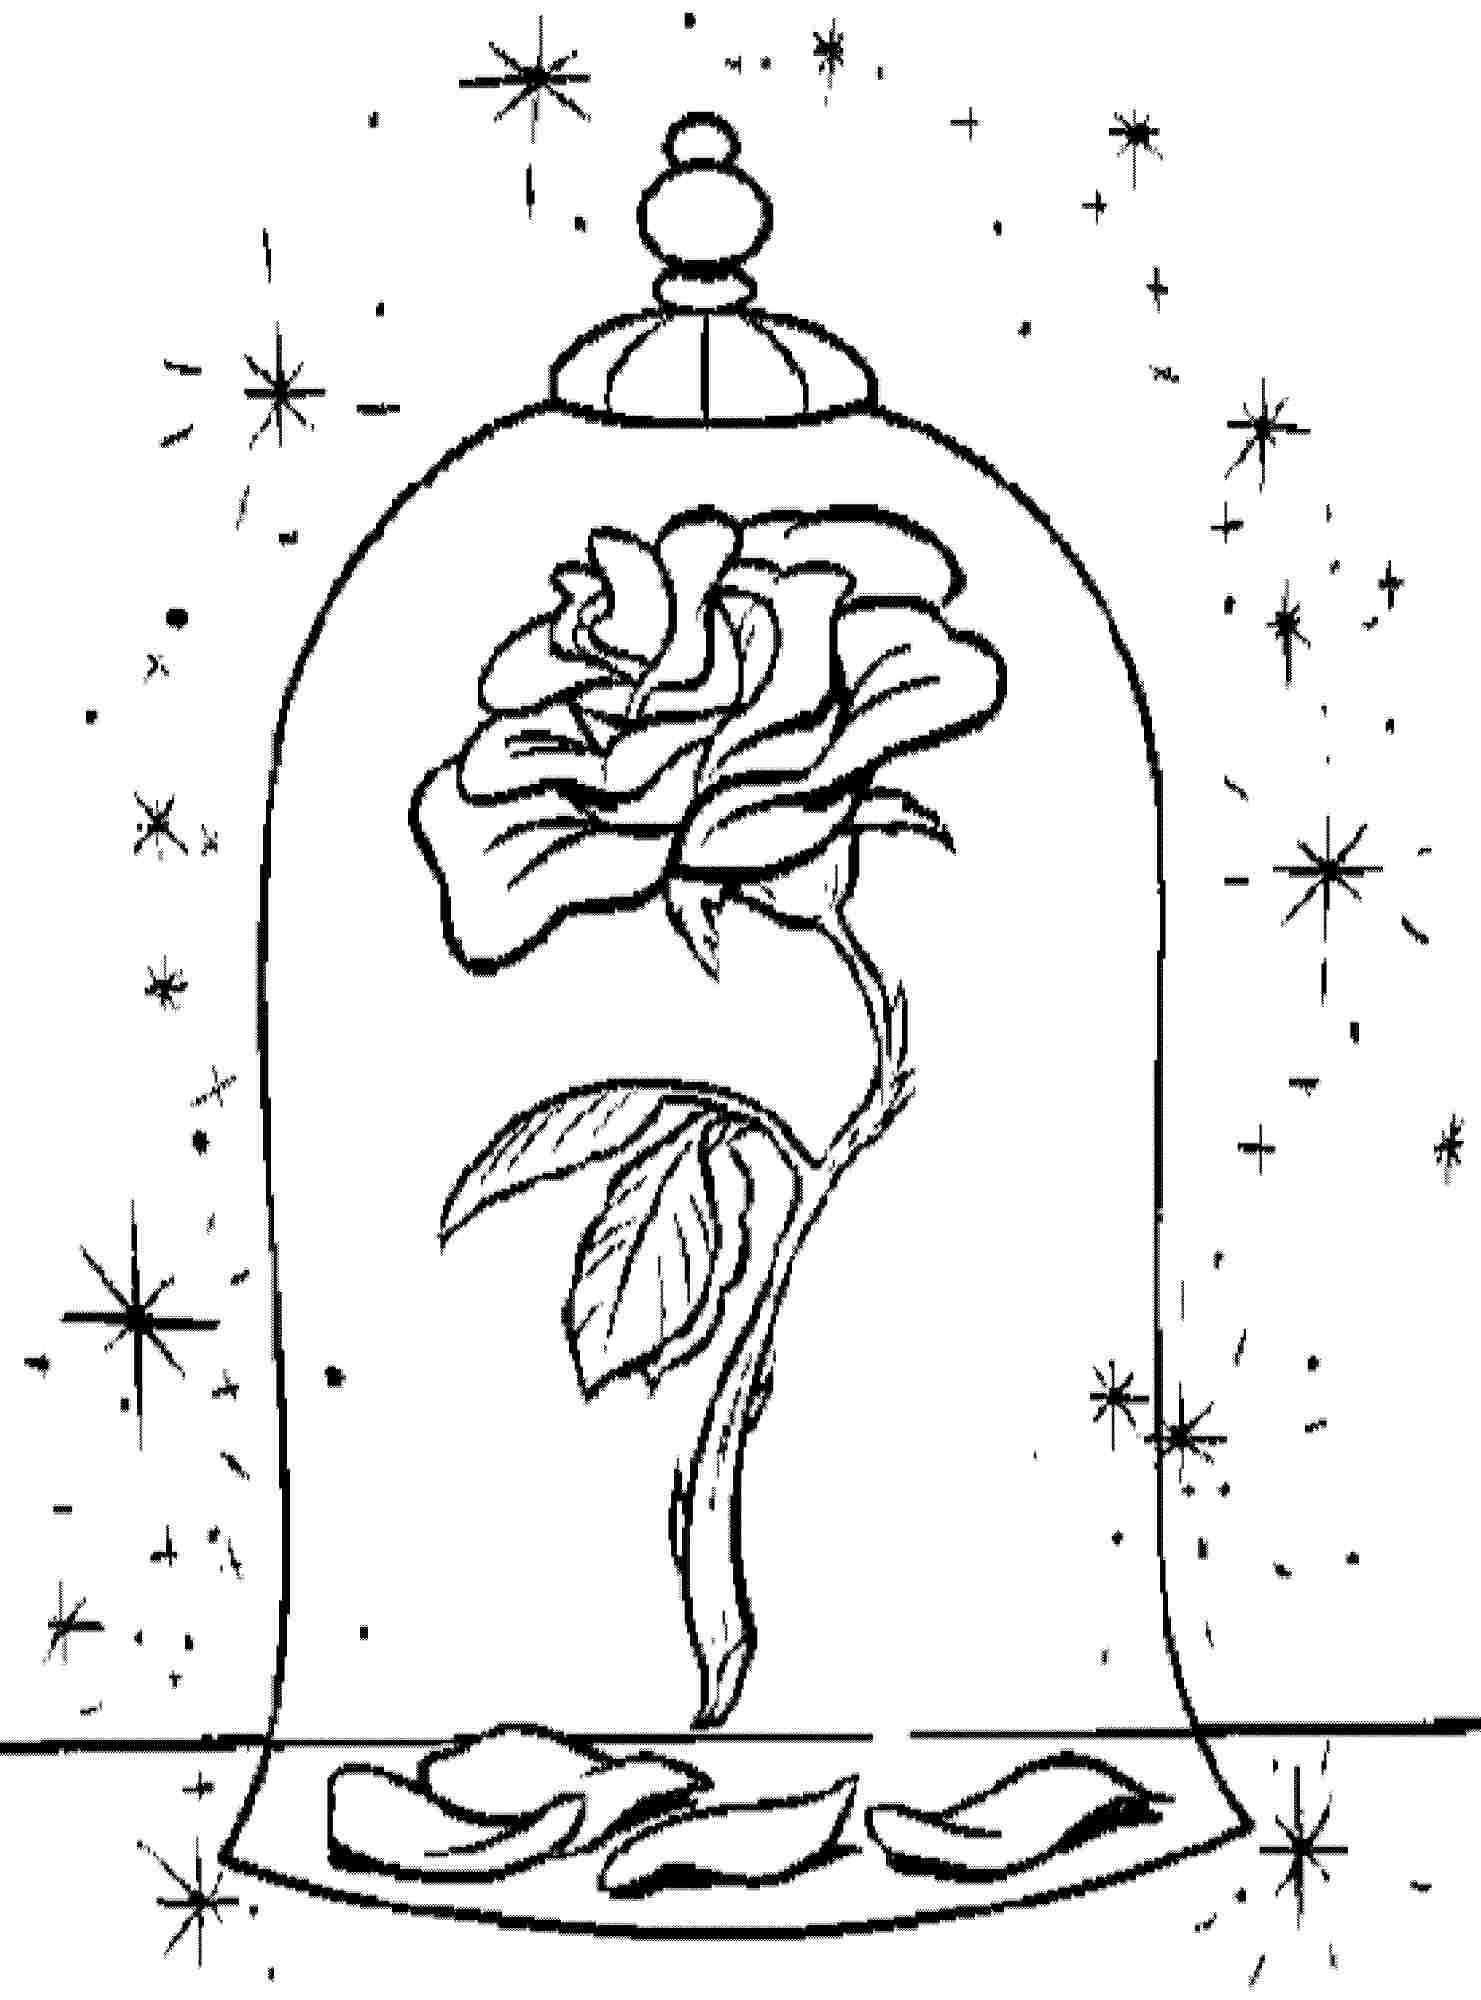 Coloring Sheets For Girls Flower With The Name Laci
 Beauty And The Beast Rose Coloring Pages